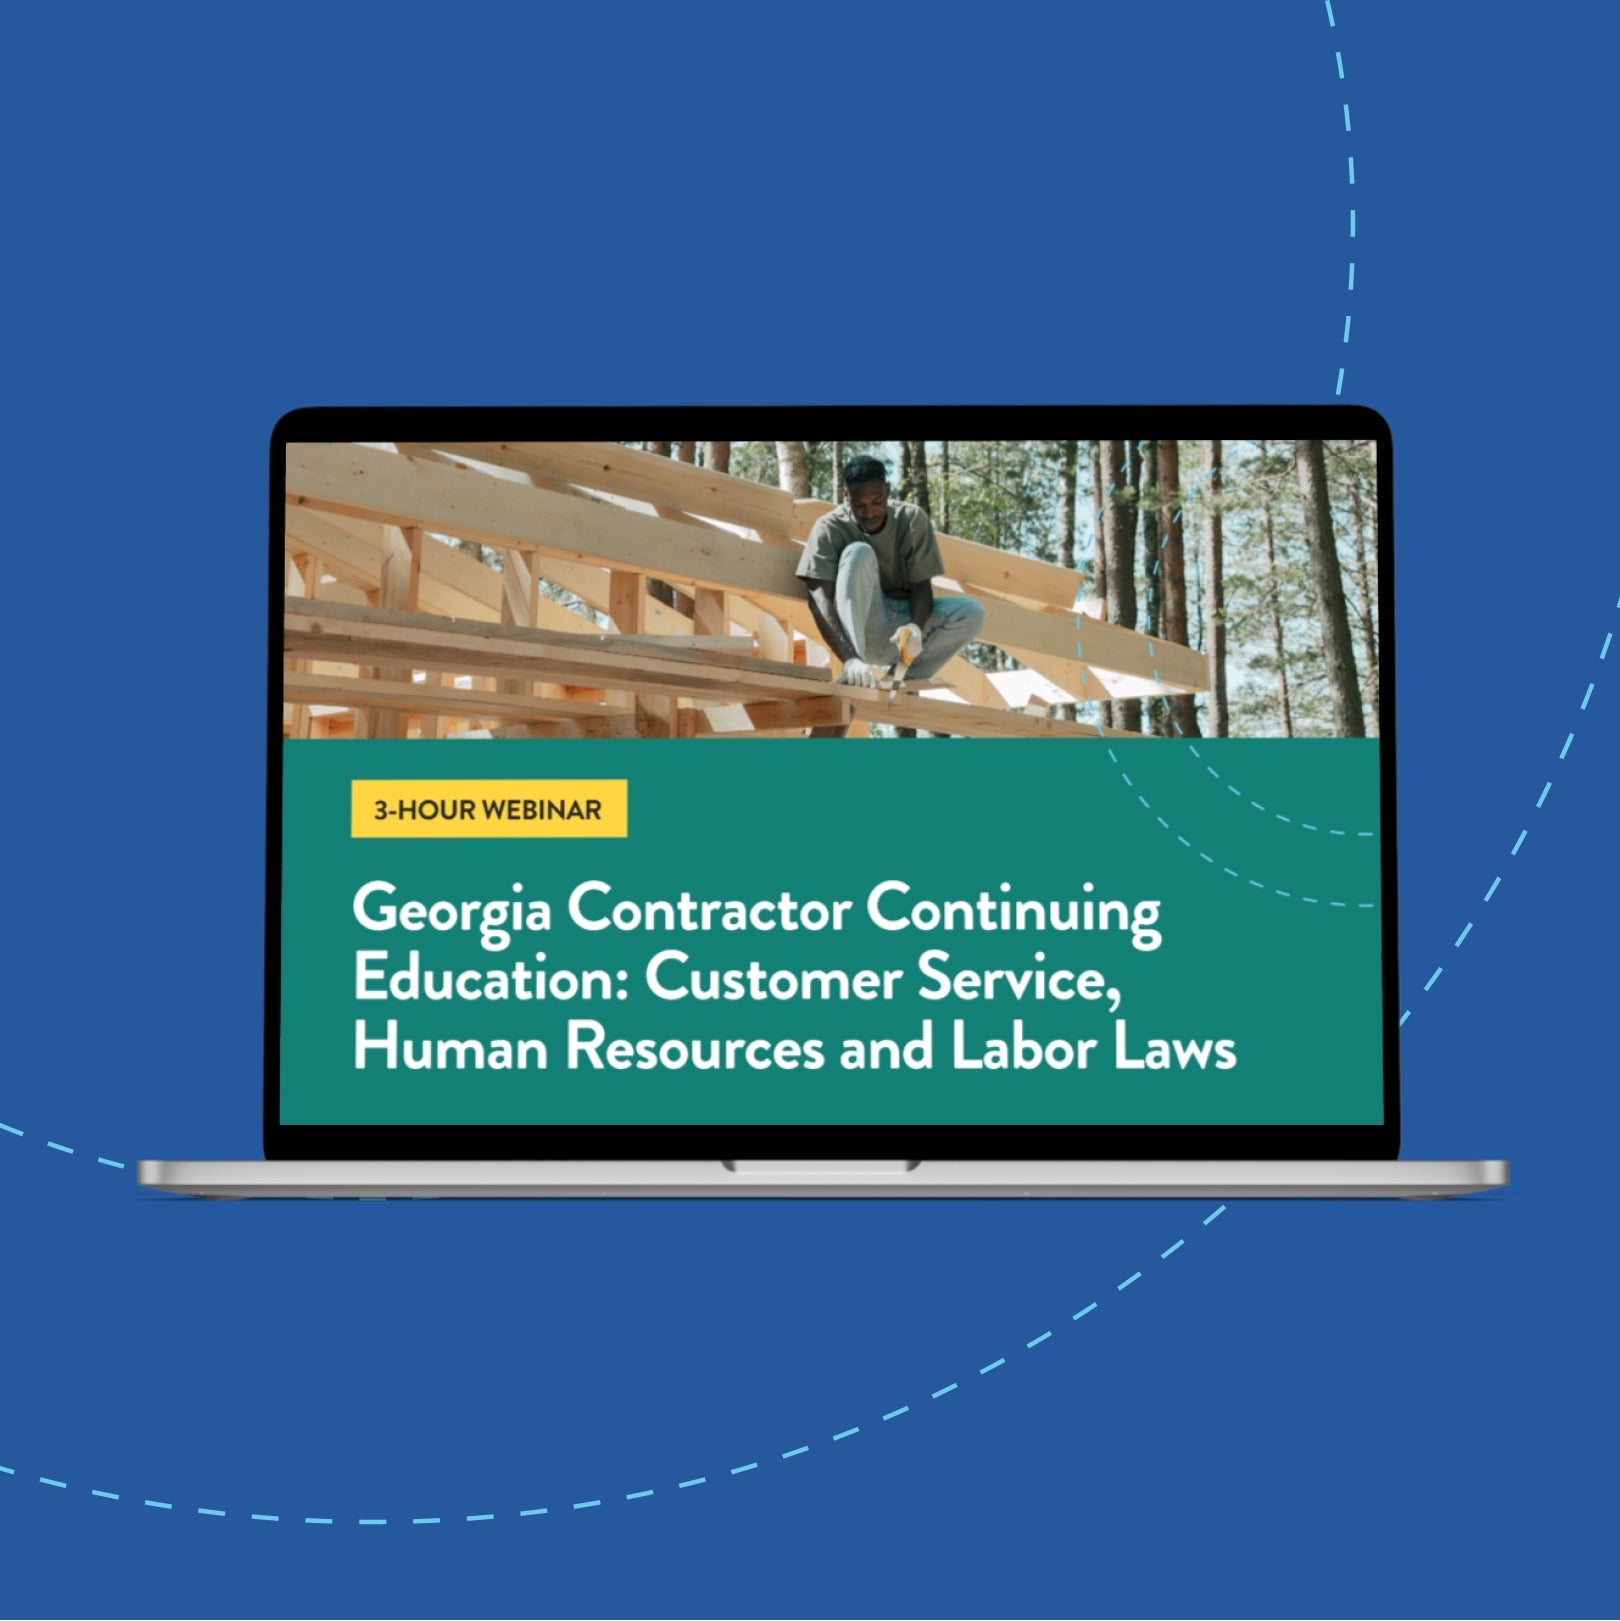 Georgia Contractor Continuing Education: Customer Service, Human Resources and Labor Laws - 3-Hour Online Course